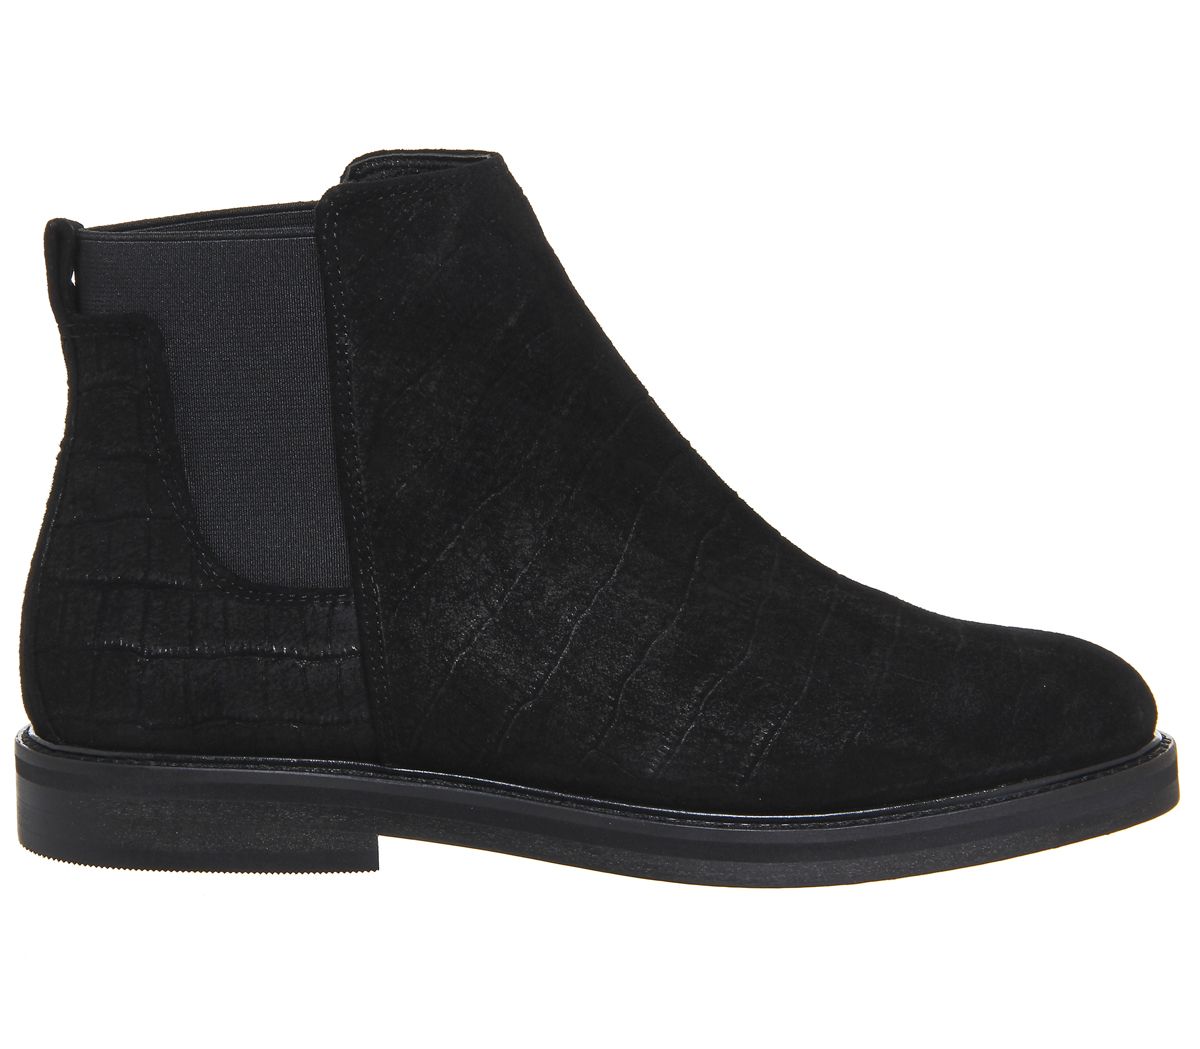 KDB Darcey Chelsea Boots Black Croc Embossed Nubuck - Ankle Boots